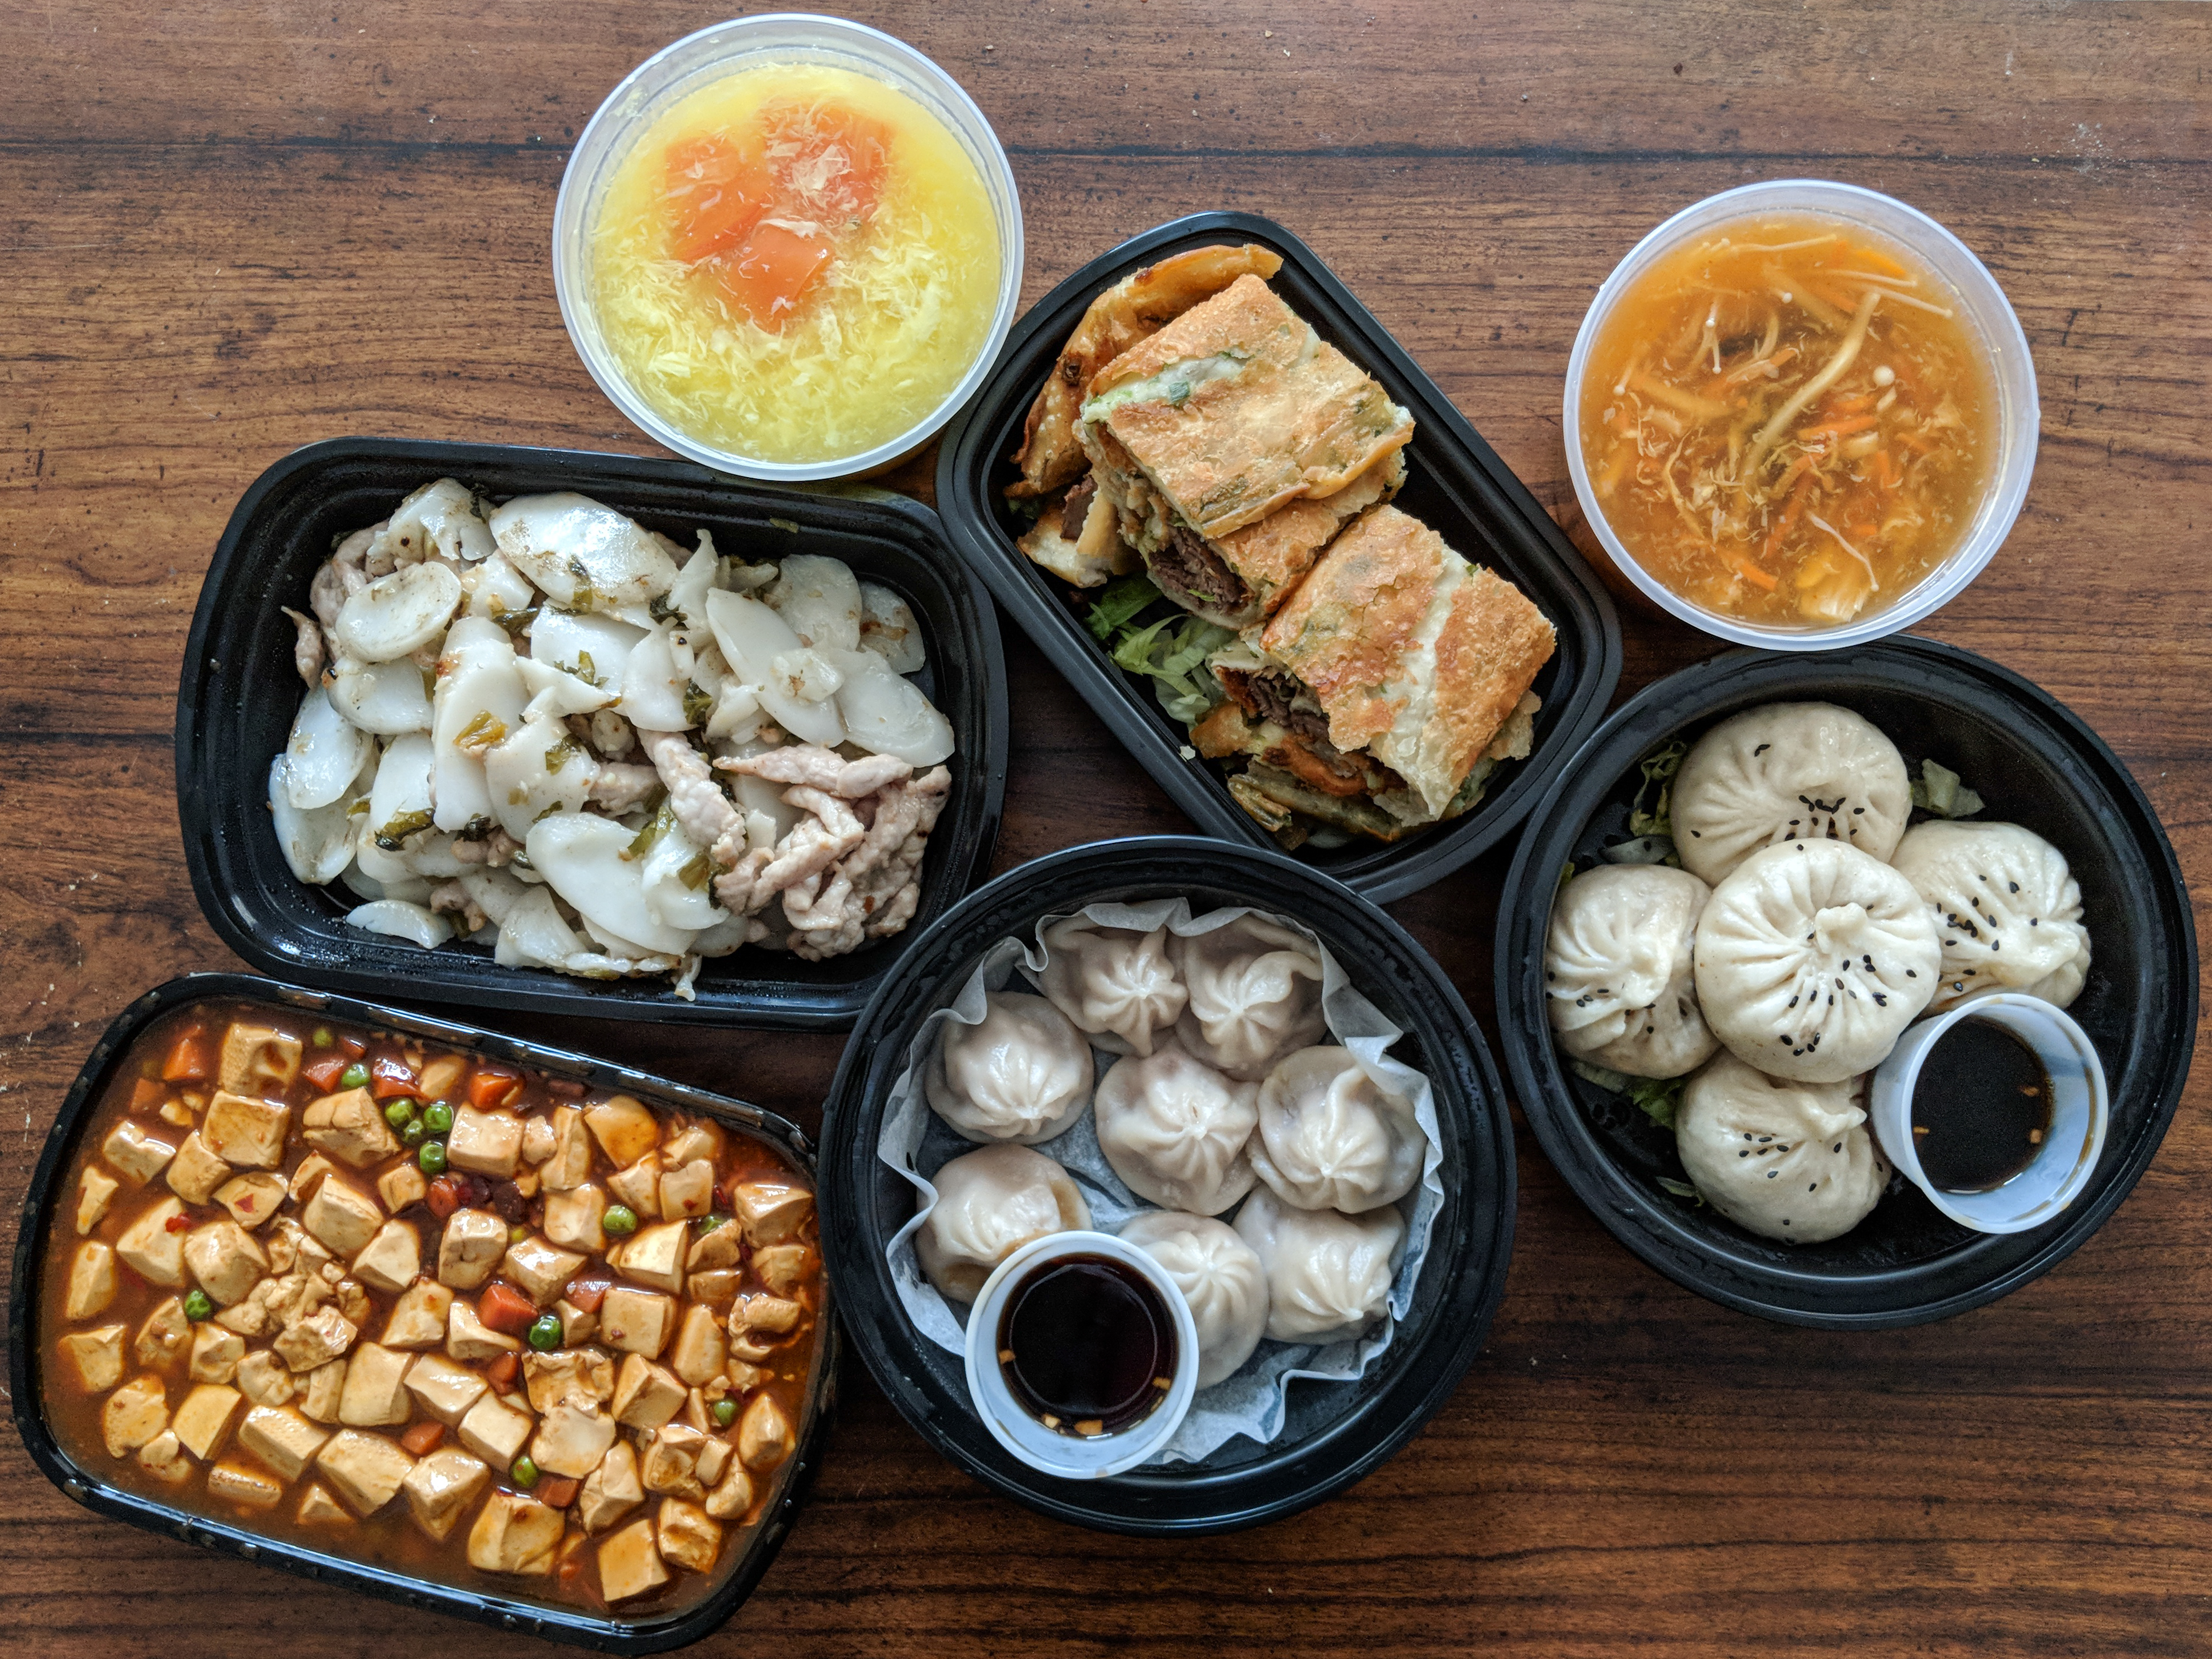 Dumpling Kitchen delivery spread, including mini juicy pork buns, roast beef with scallion pancake, ma po tofu, and more